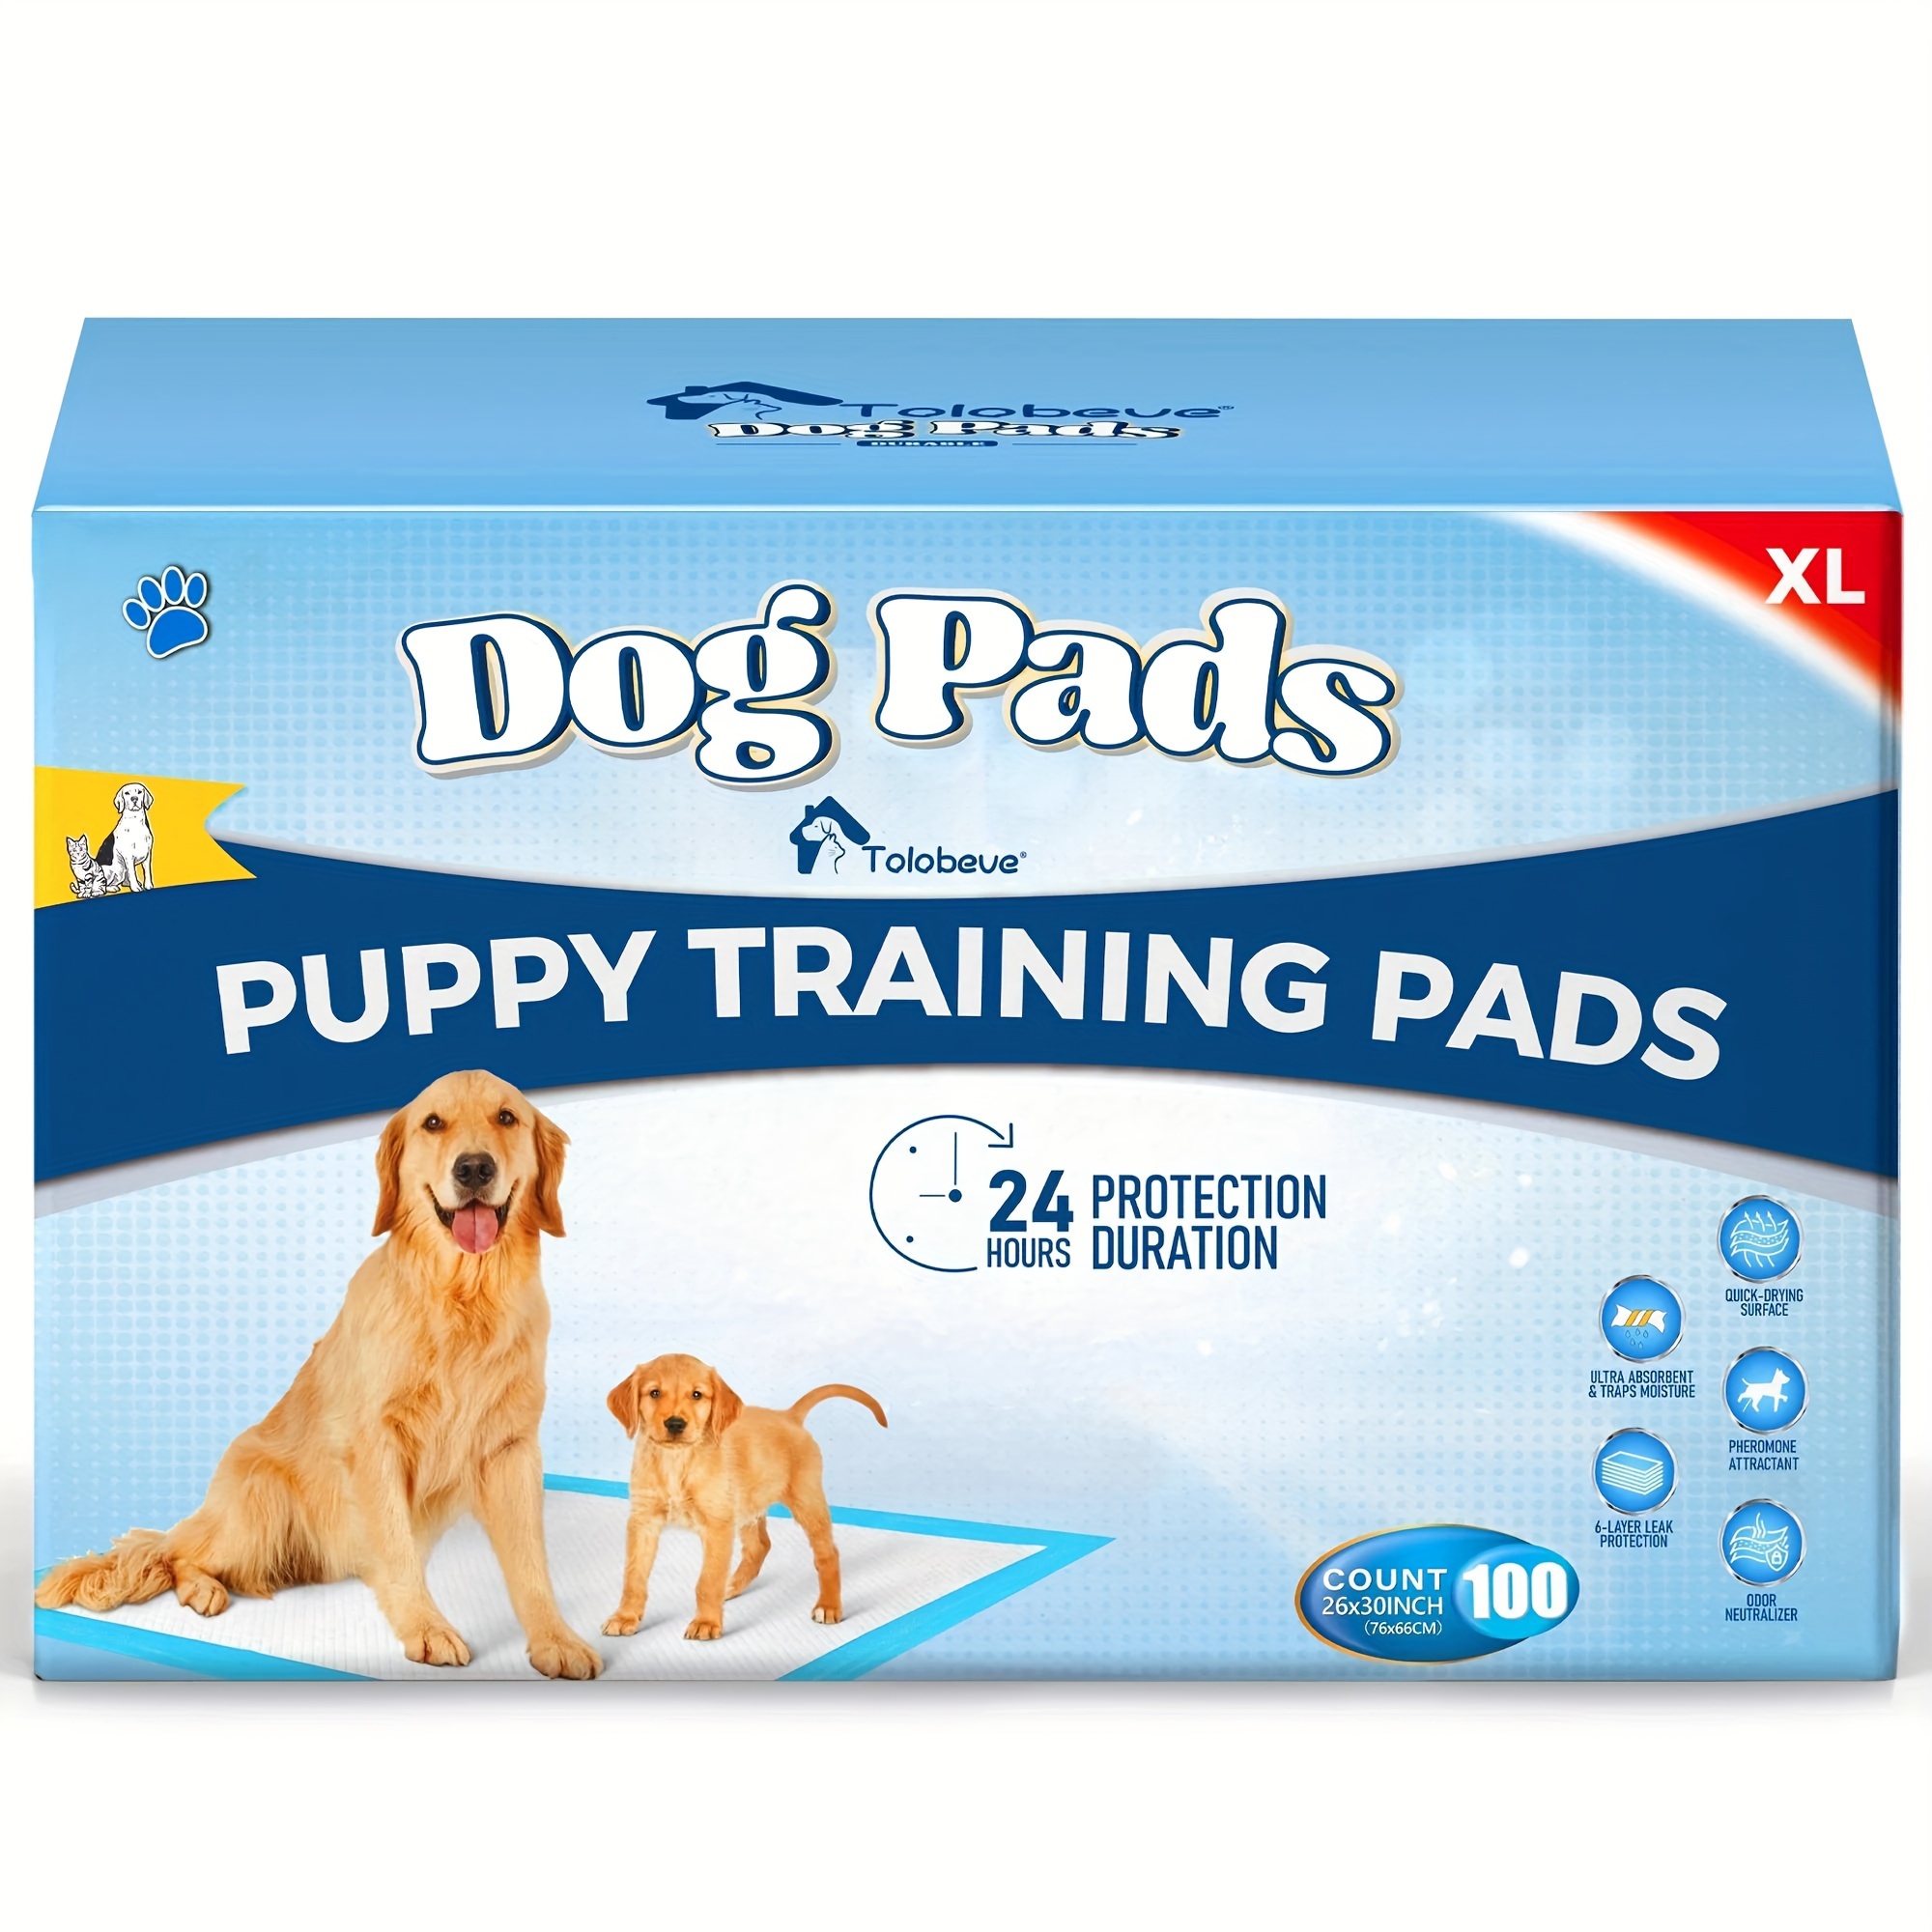 

Dog Training Pads, Xl, 26 In X 30 In, 100 Count Disposable Dog Pads, Puppy Pee Pads